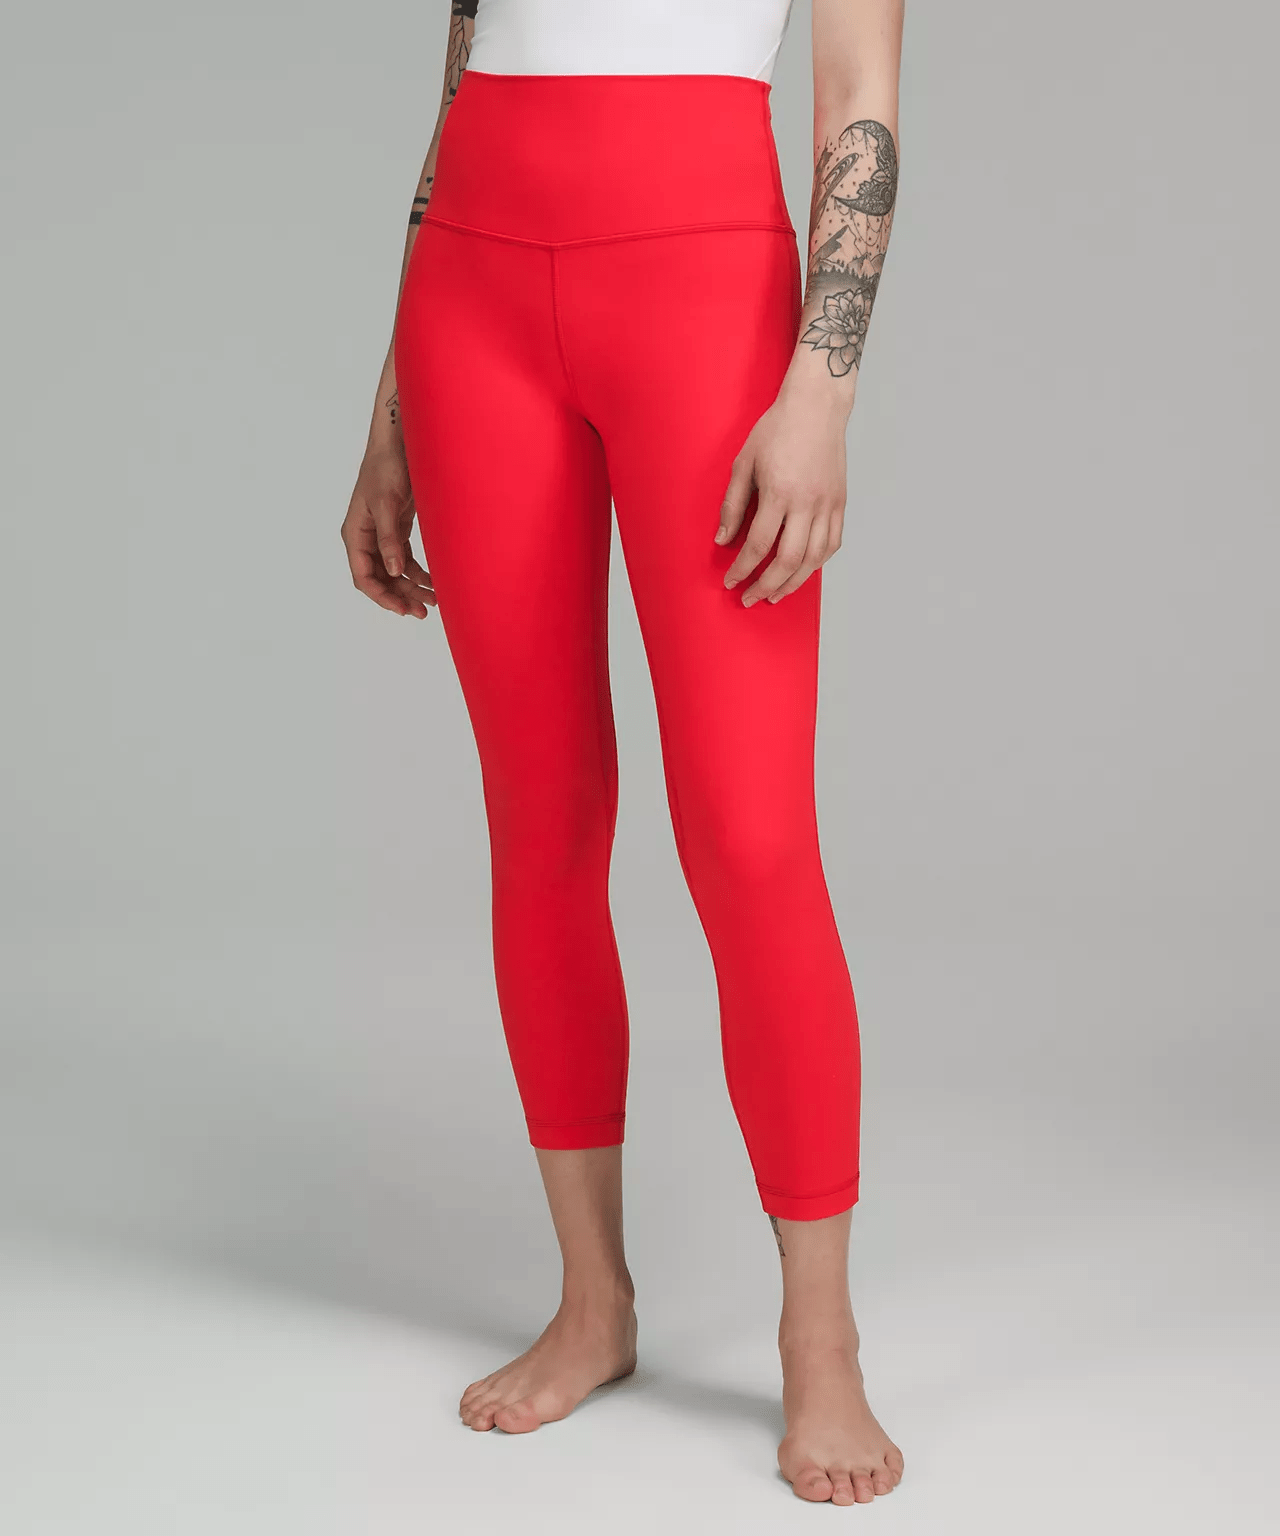 lululemon align leggings - when will lululemon restock their align leggings? lululemon restock times. Find out about when the lululemon upload is.